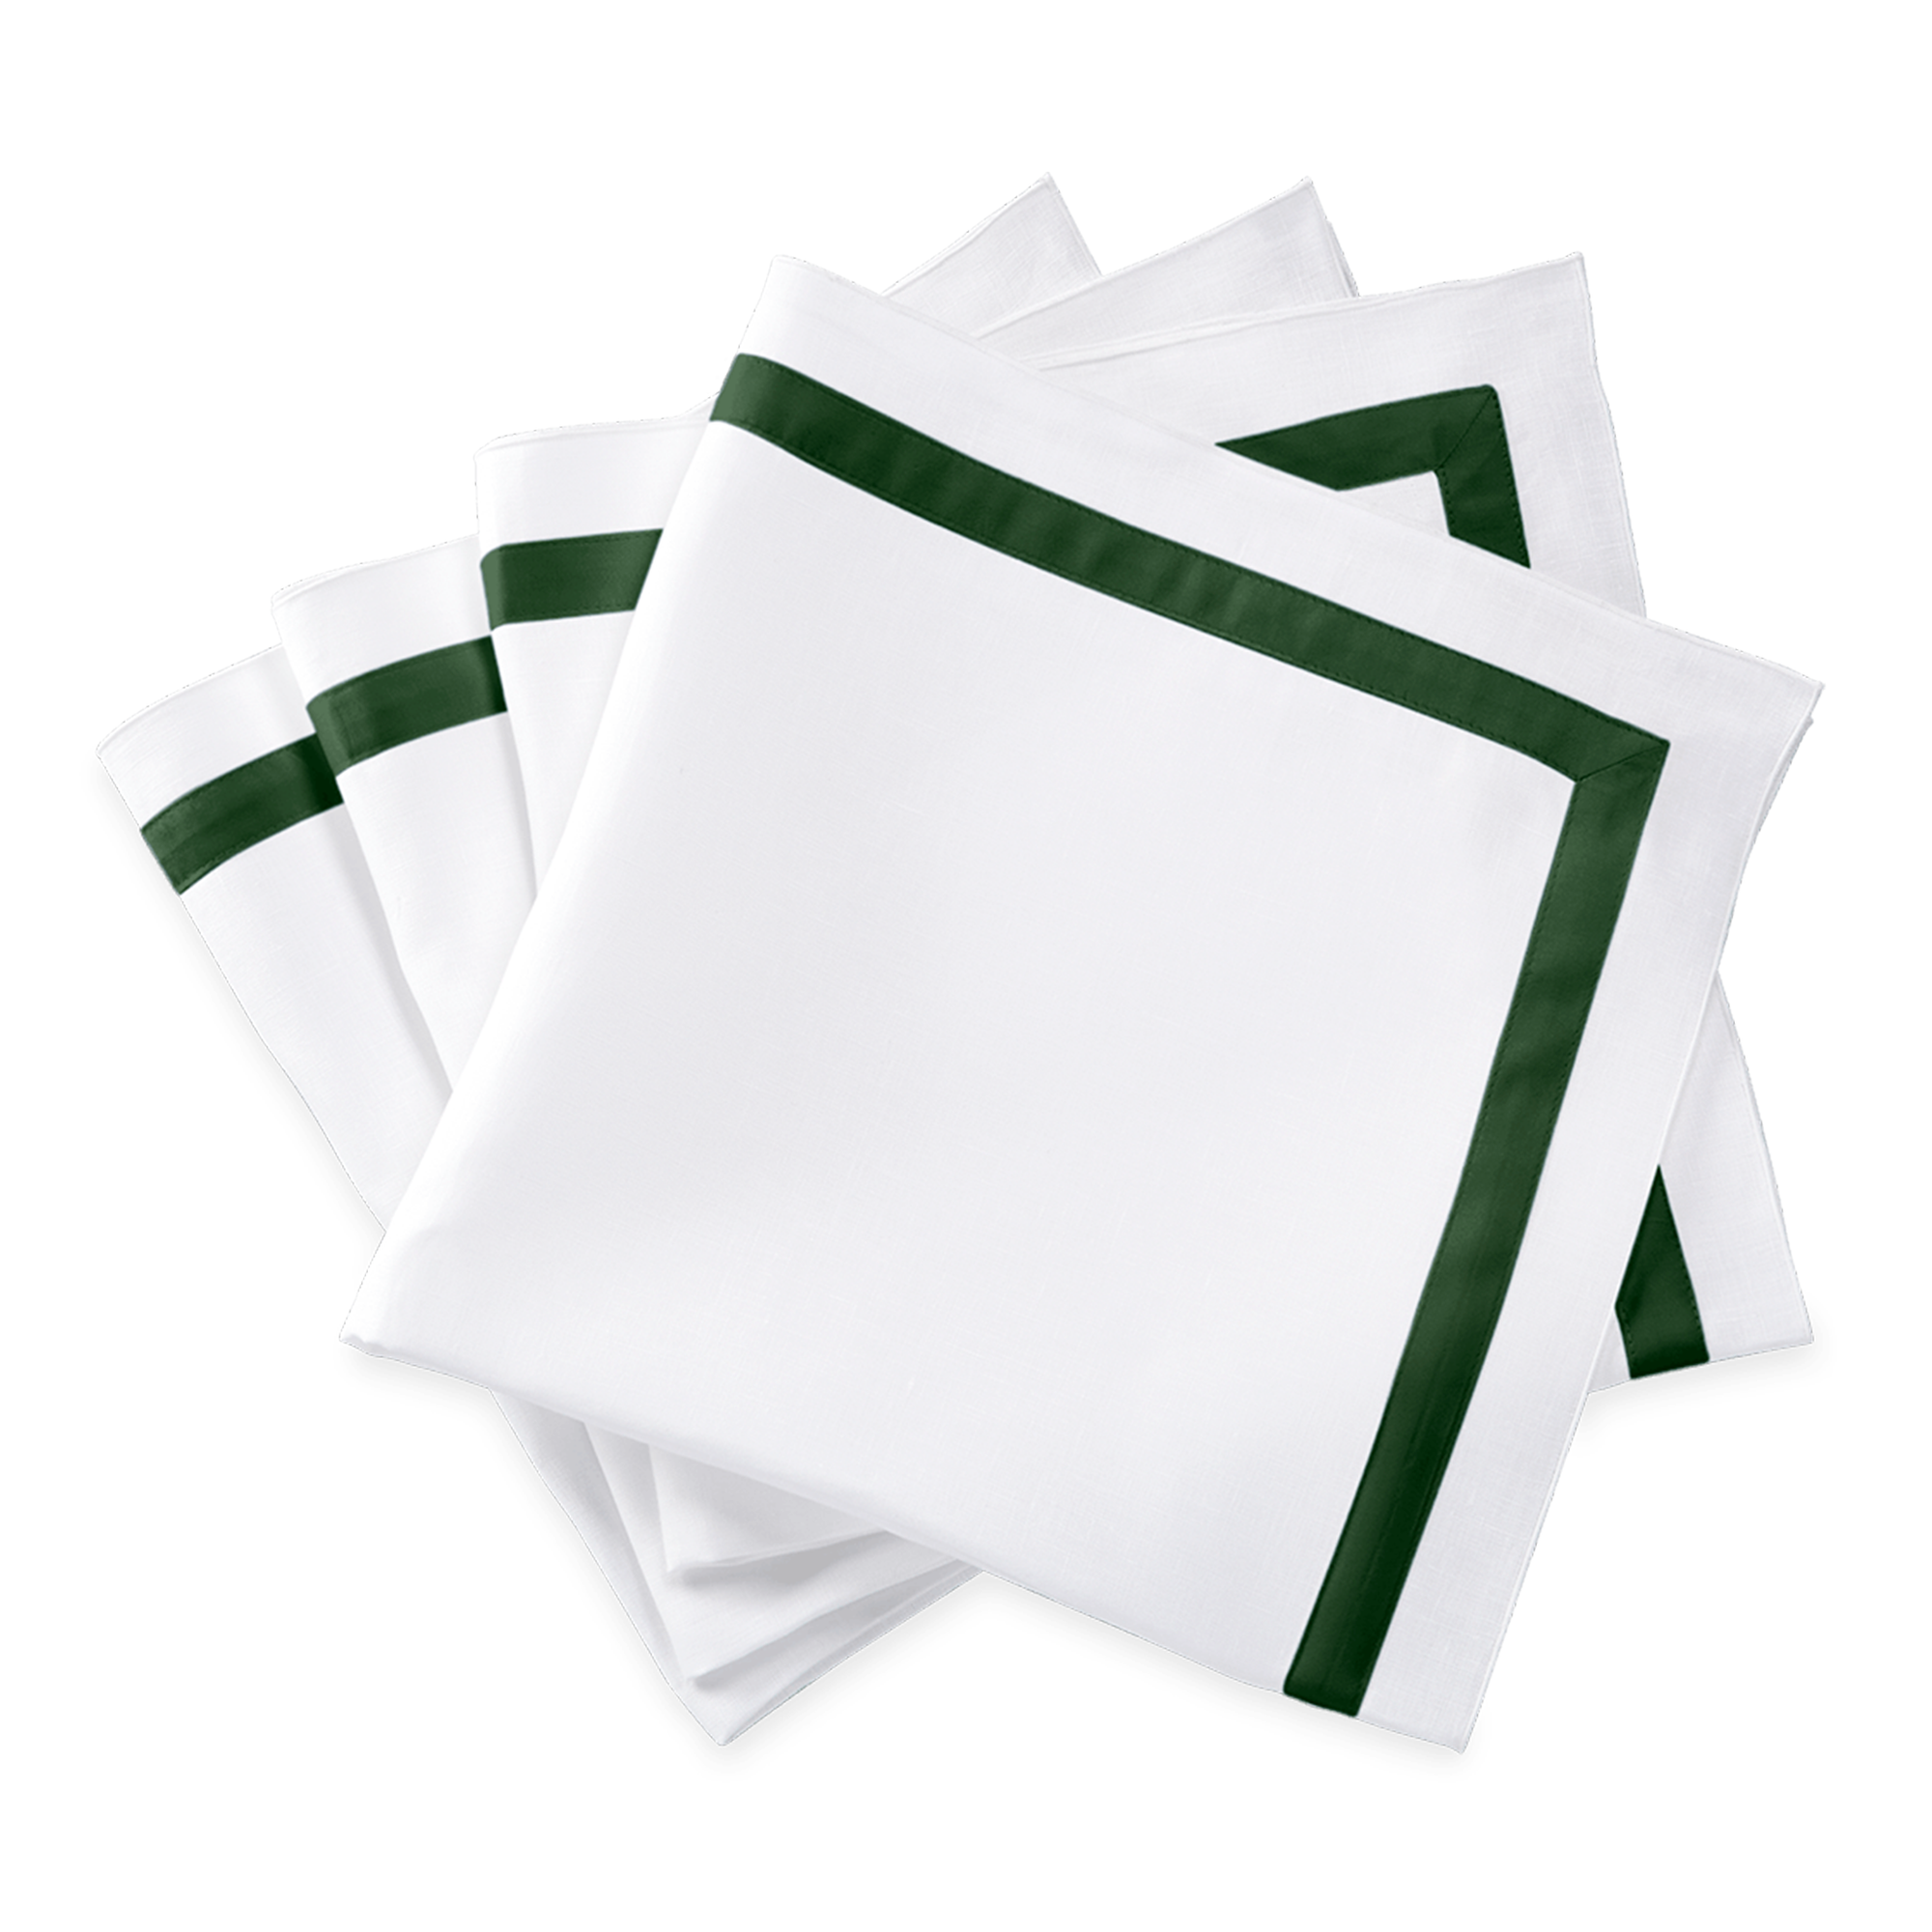 Dinner Napkins of Matouk Schumacher Lowell Table Linens in Color Green